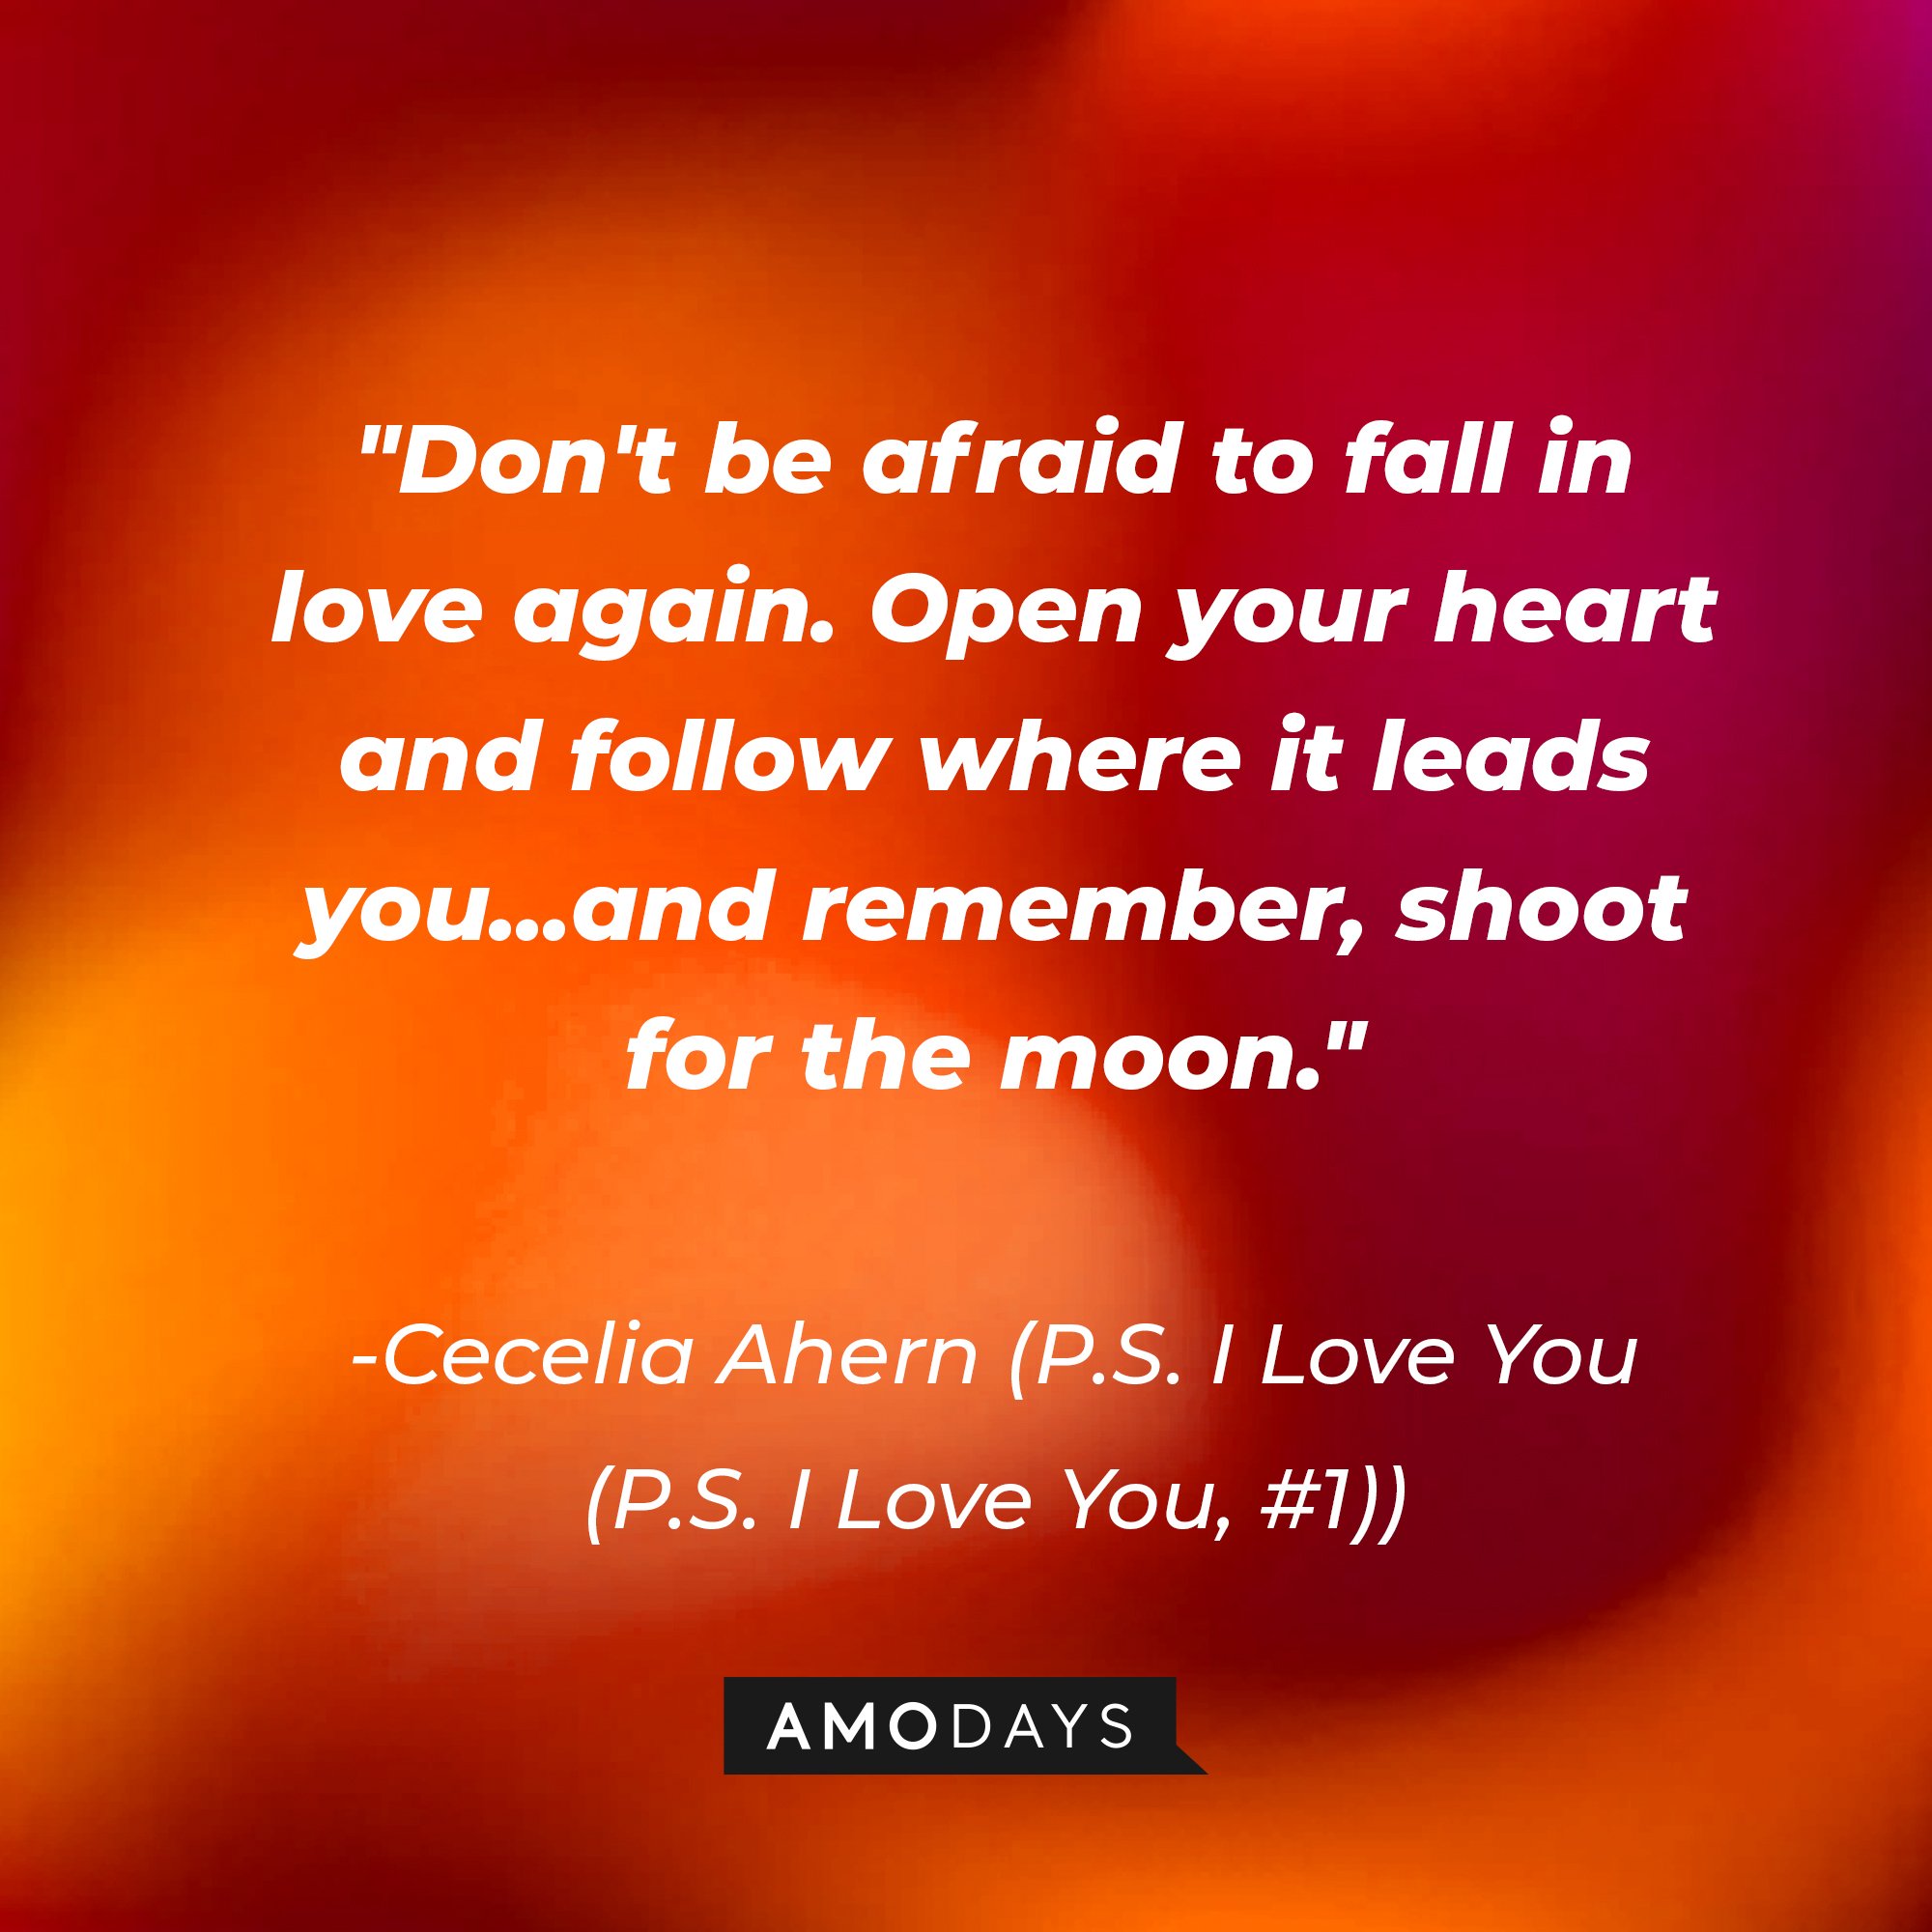 Cecelia Ahern's quote: "Don't be afraid to fall in love again. Open your heart and follow where it leads you...and remember, shoot for the moon." | Image: AmoDays